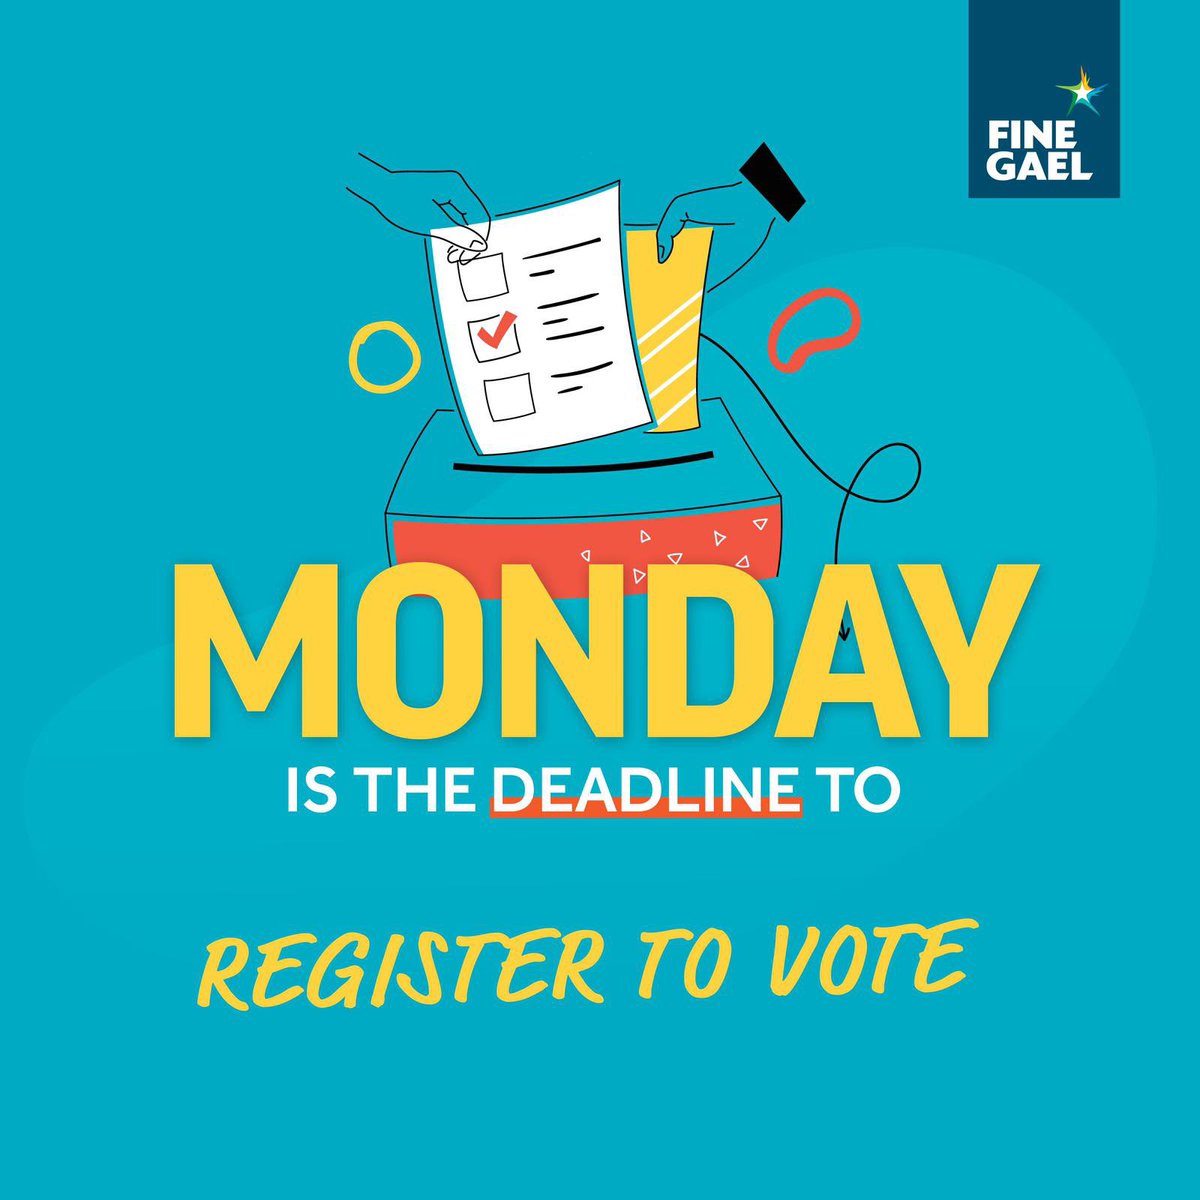 The Local and European elections are more important than ever and it’s vital we retain a strong Fine Gael presence in Europe and at local level. Monday is your deadline to register to vote. Visit checktheregister.ie to find out how.